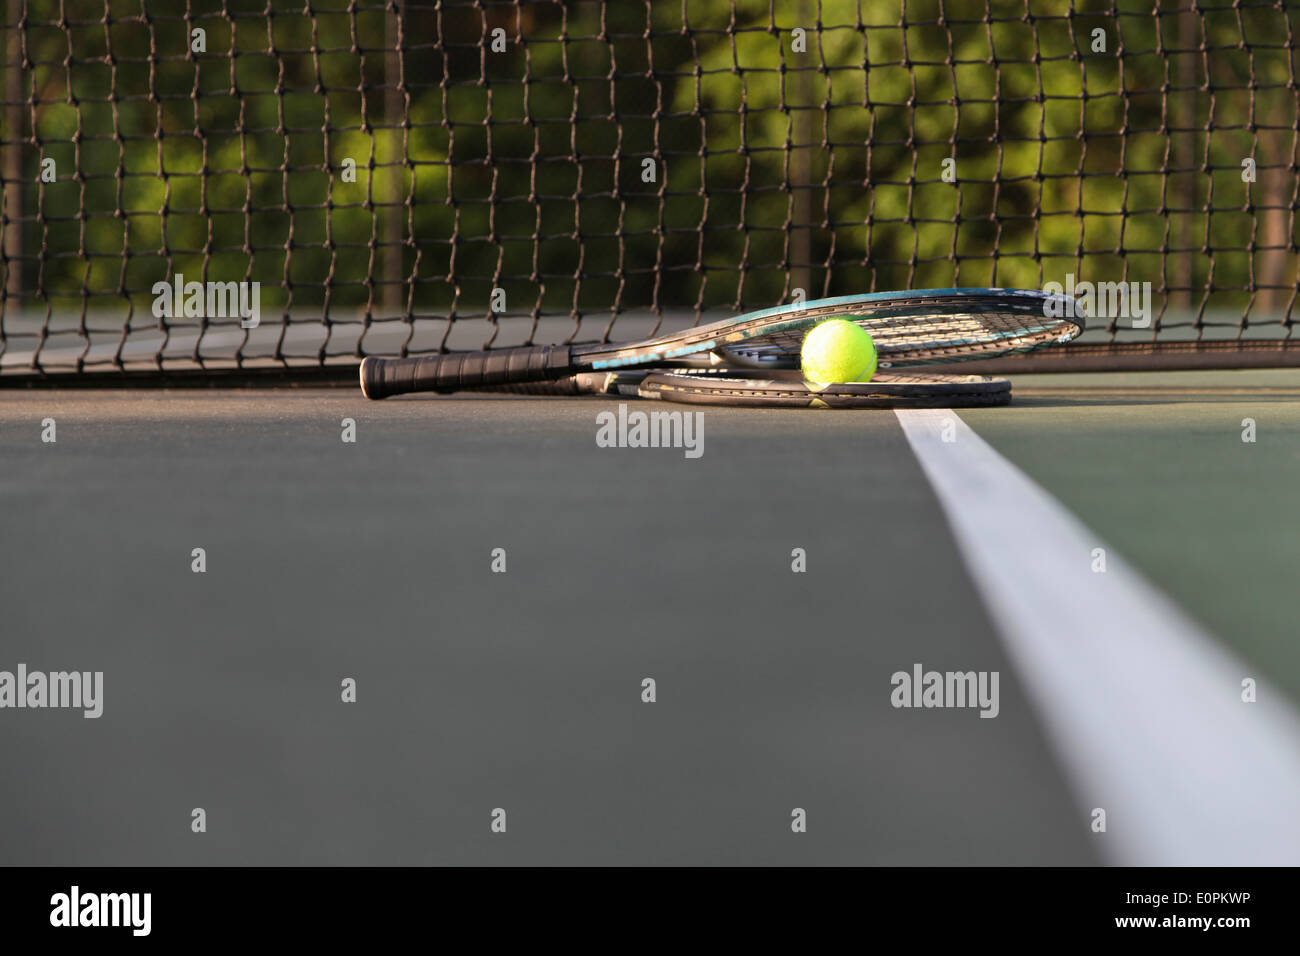 Rackets and ball on court by net. Stock Photo